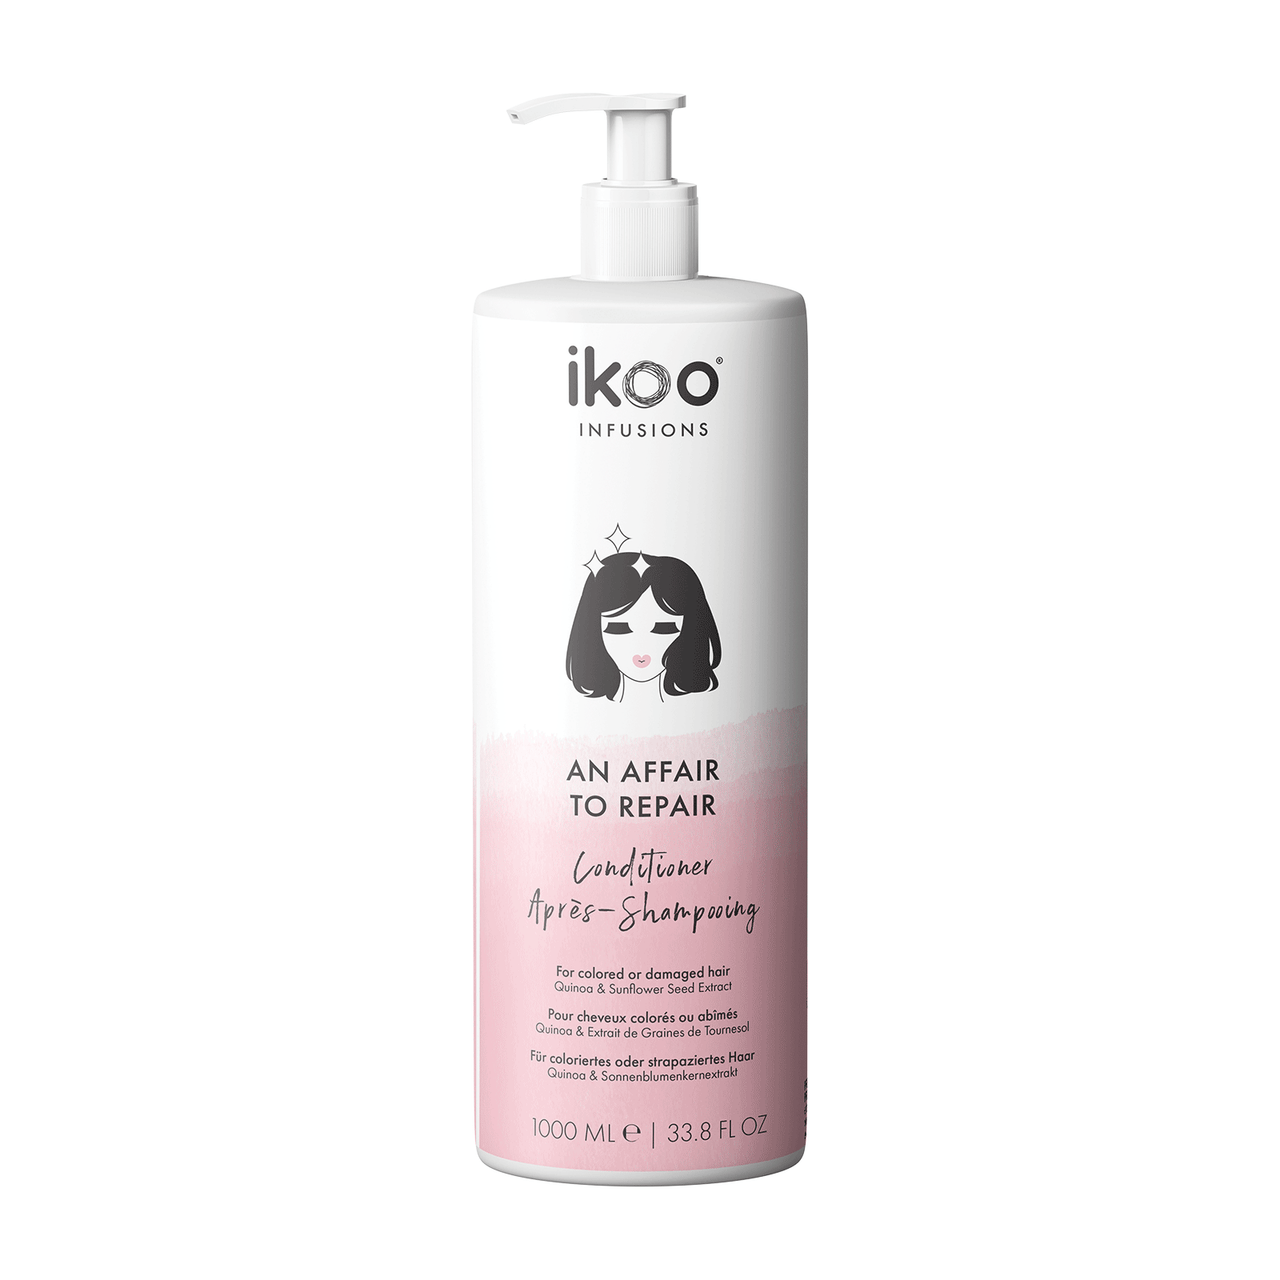 ikoo An Affair To Repair Conditioner 1 Liter